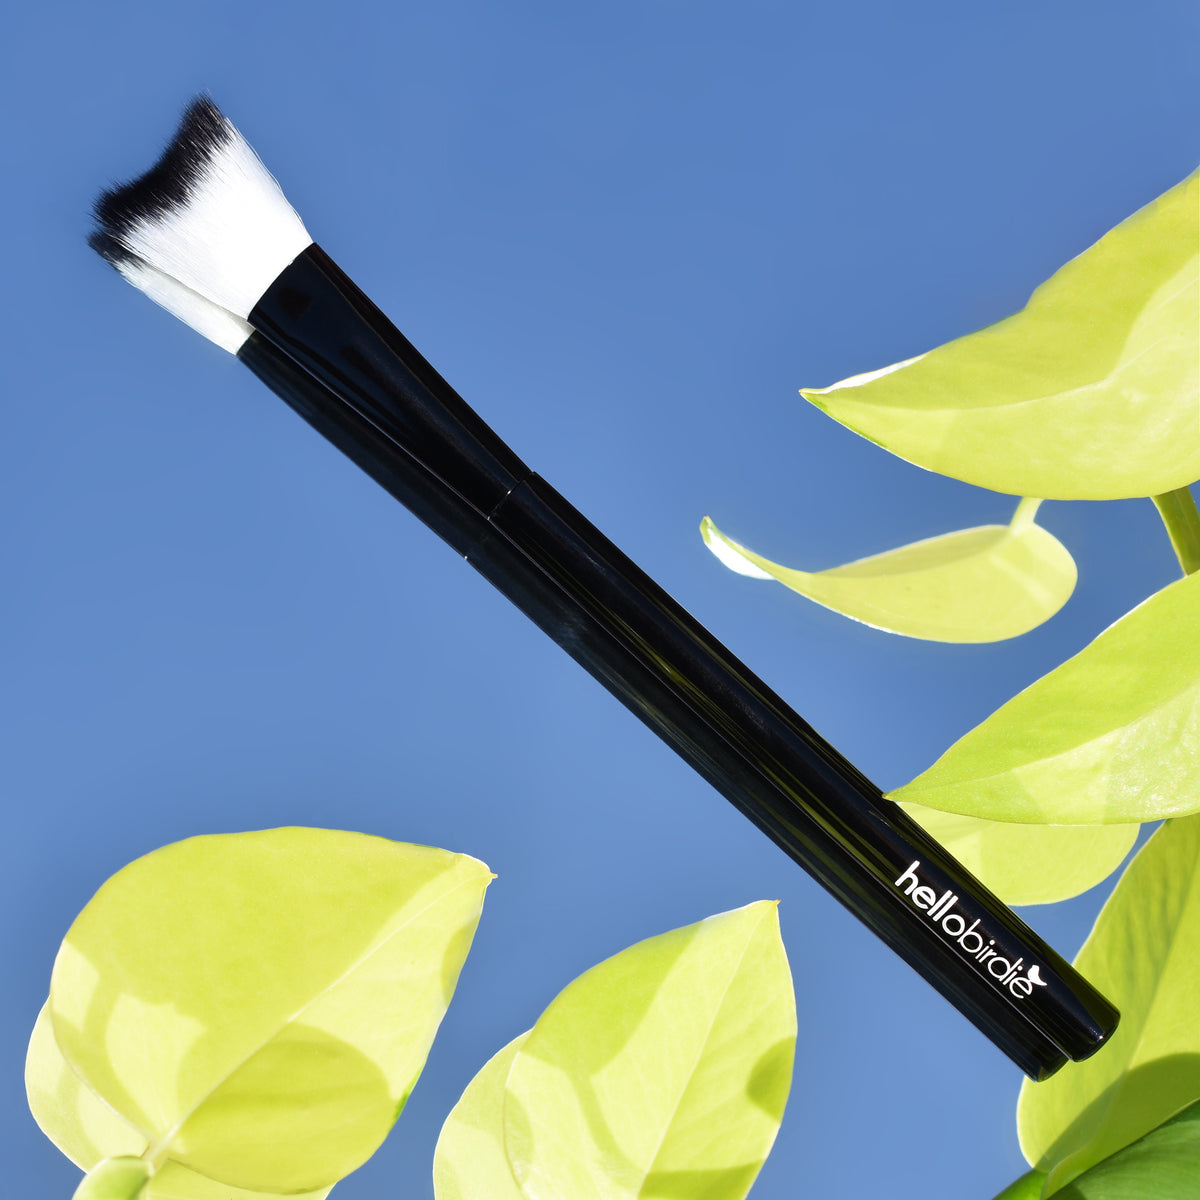 Lash cleansing brush sitting on a mirror with vibrant green leaves and clear blue sky in the reflection.  The brush has a shiny black handle with the Hello Birdie logo in white toward the base.  